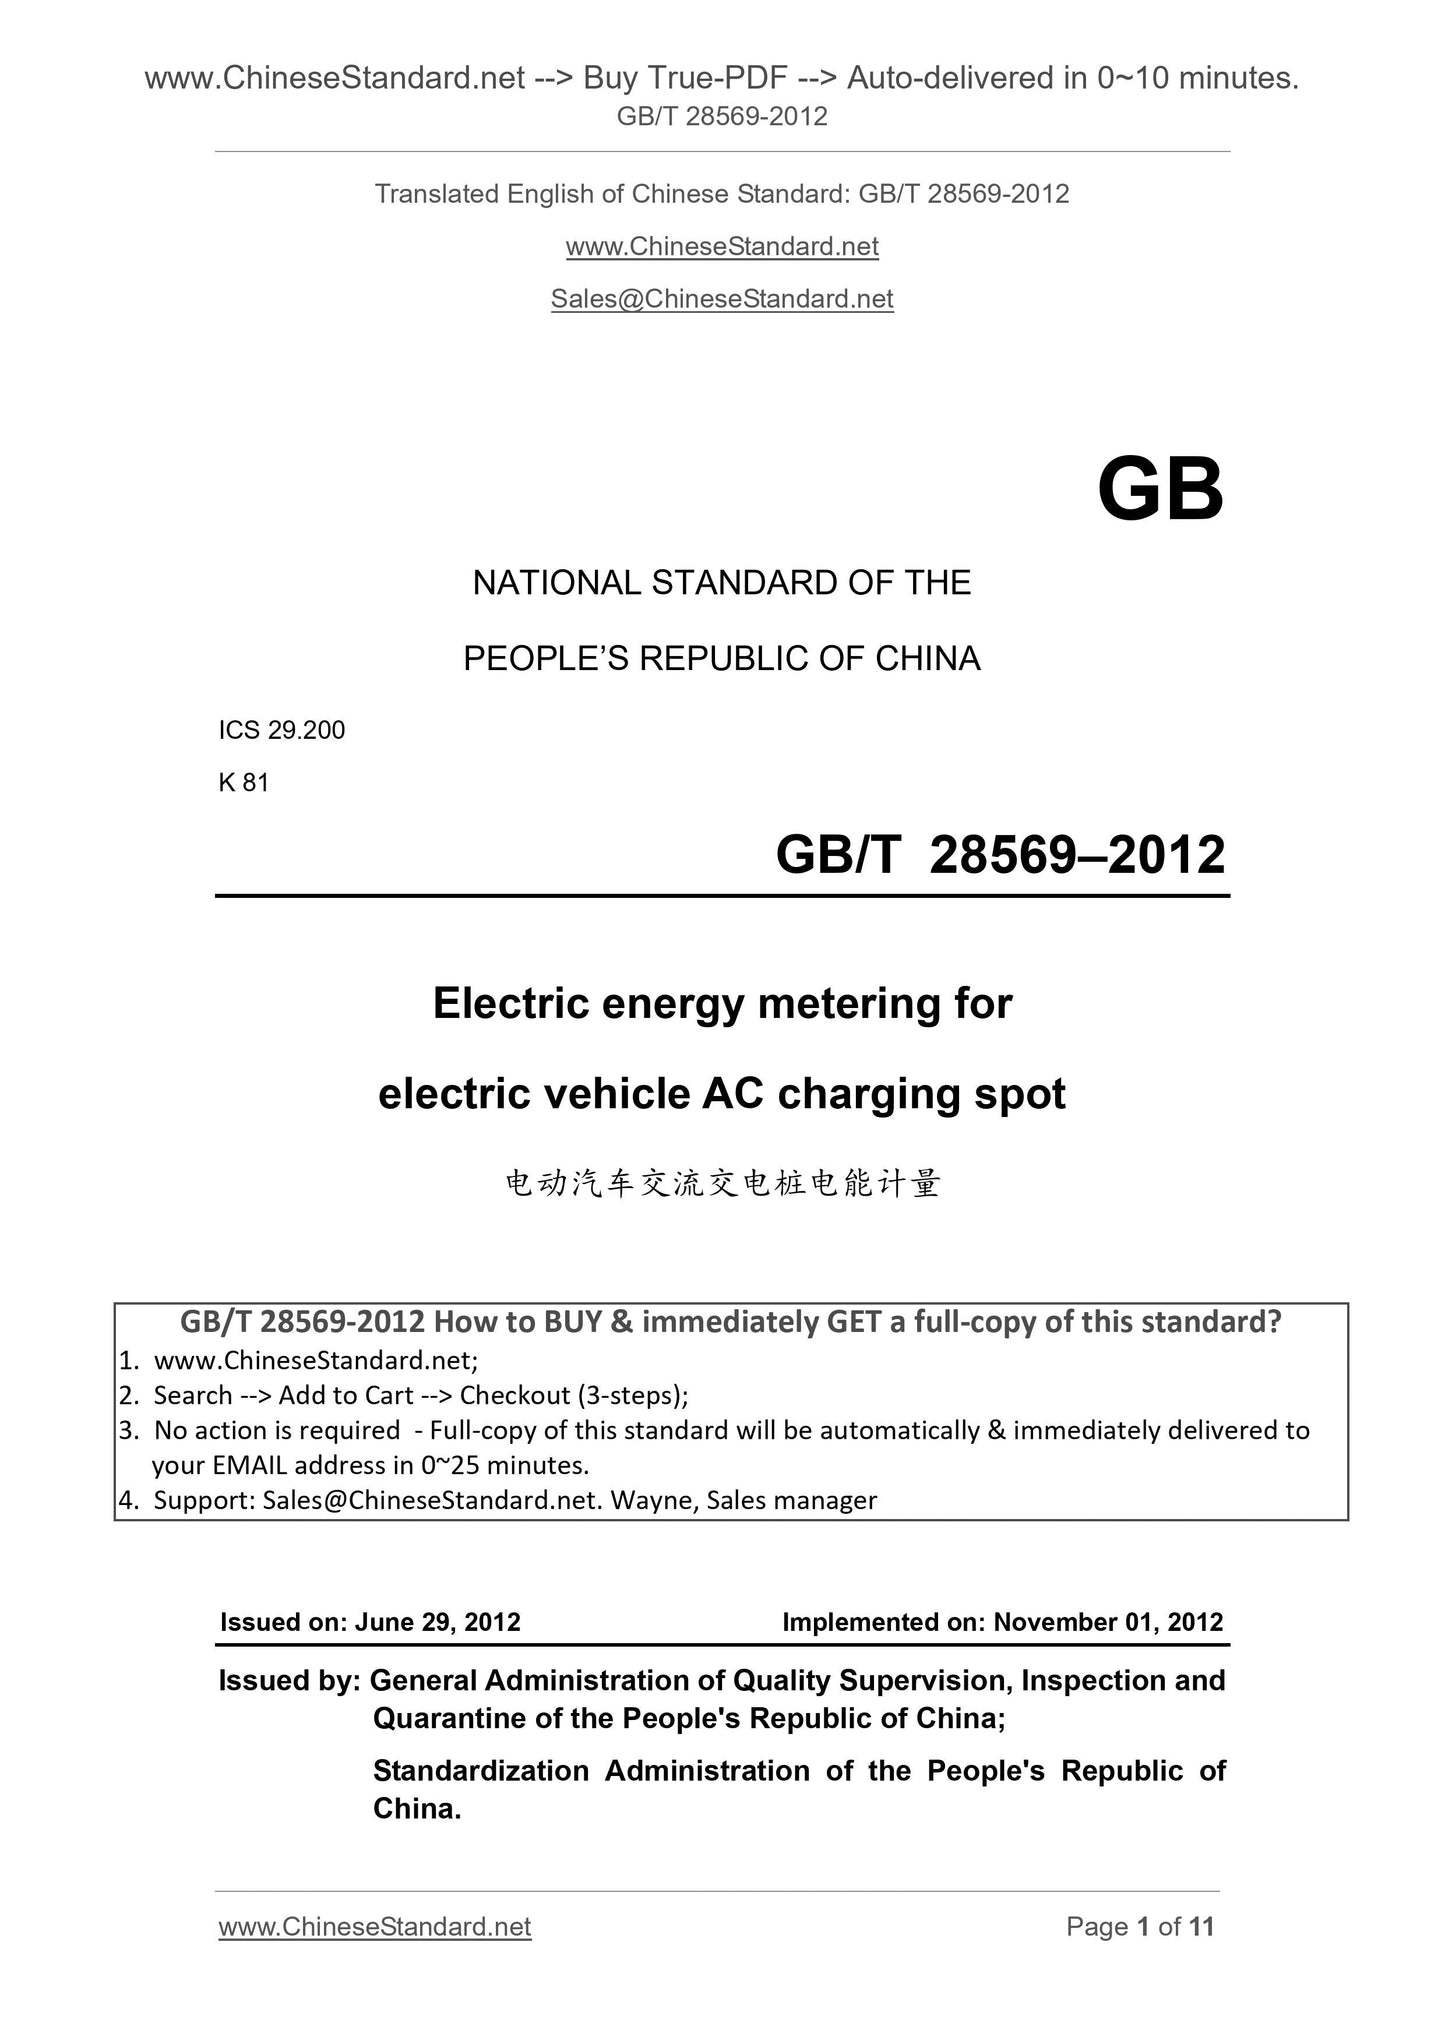 GB/T 28569-2012 Page 1